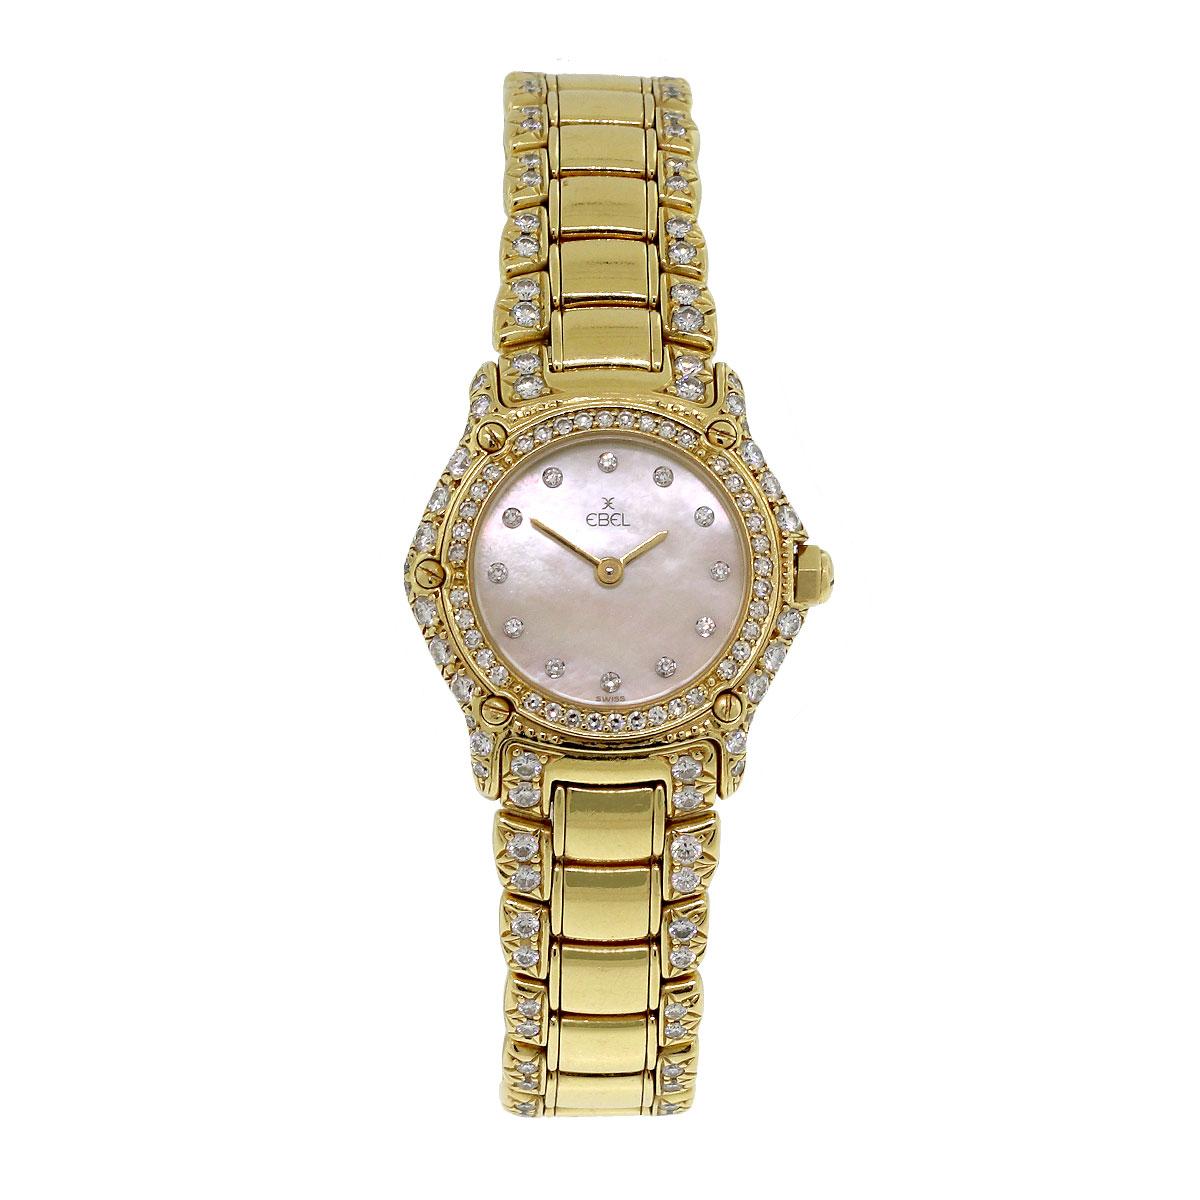 Brand: Ebel
MPN: 8057920
Model: 1911
Case Material: 18k yellow gold with diamonds
Case Diameter: 23mm
Crystal: Sapphire crystal
Bezel: 18k yellow gold bezel with diamonds
Dial: mother of pearl dial with diamond hour markers and yellow gold